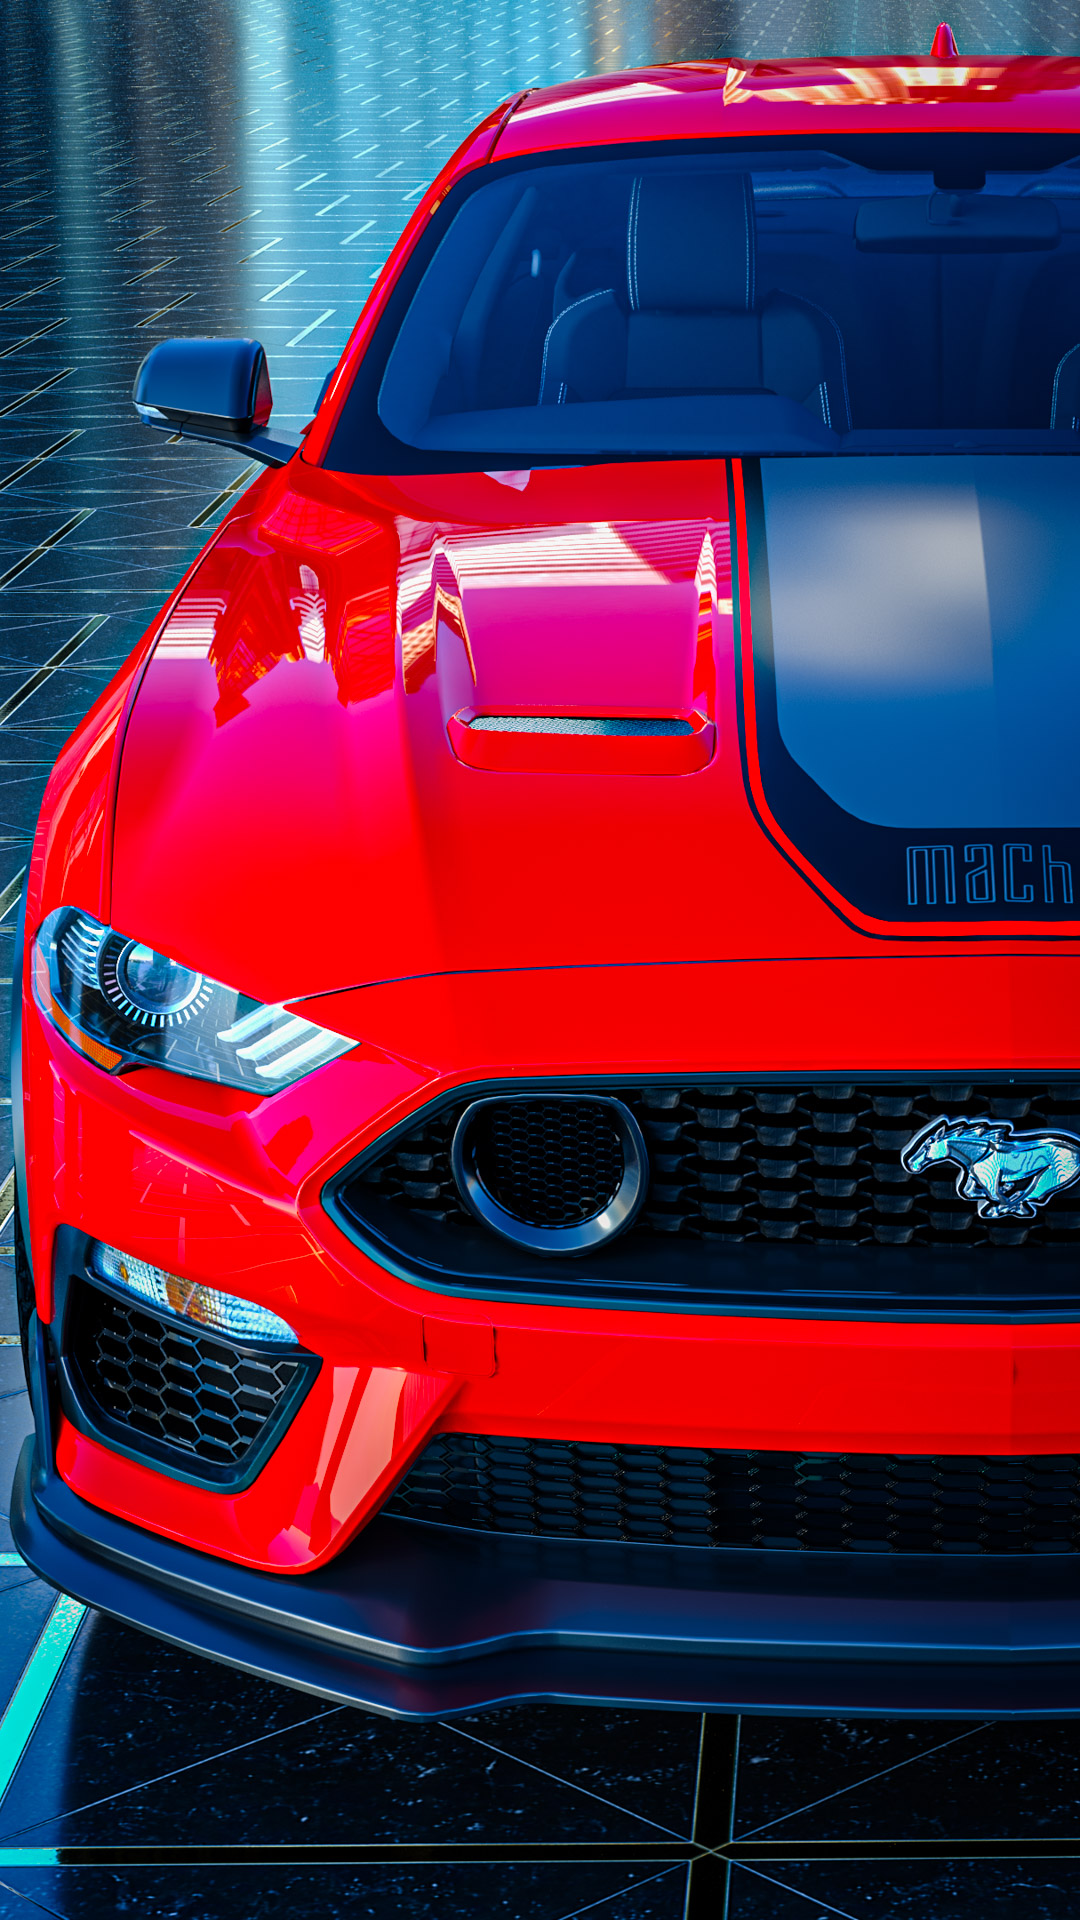 For iPhone users, our car wallpaper featuring the Ford Mustang Mach1 is a must-have, capturing the iconic design and power of this classic muscle car.